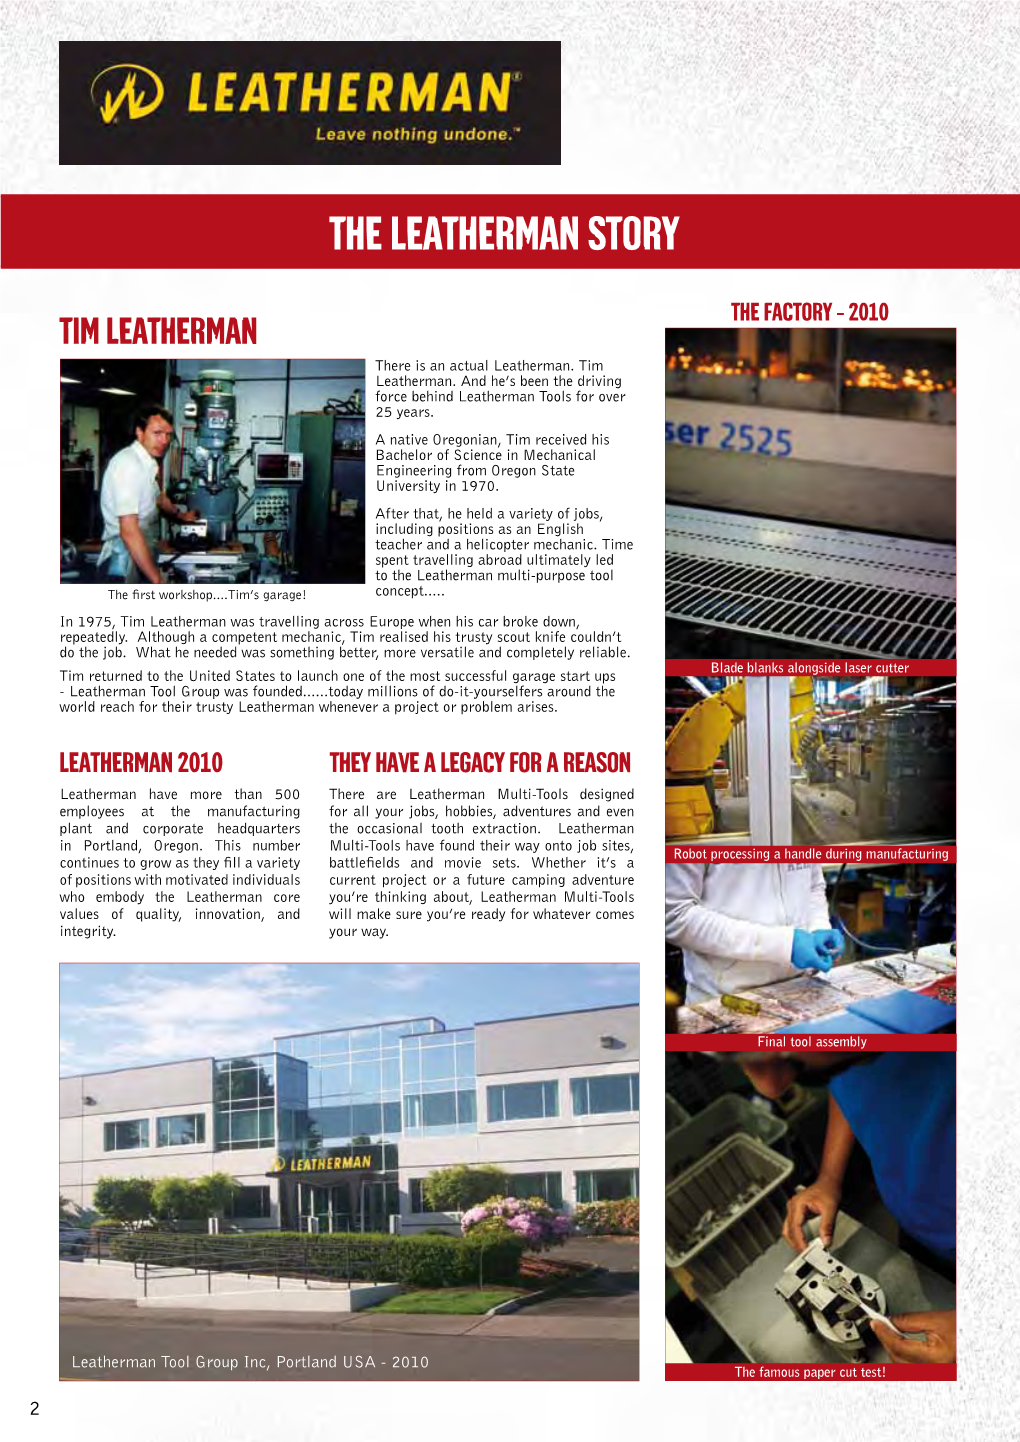 The Leatherman Story